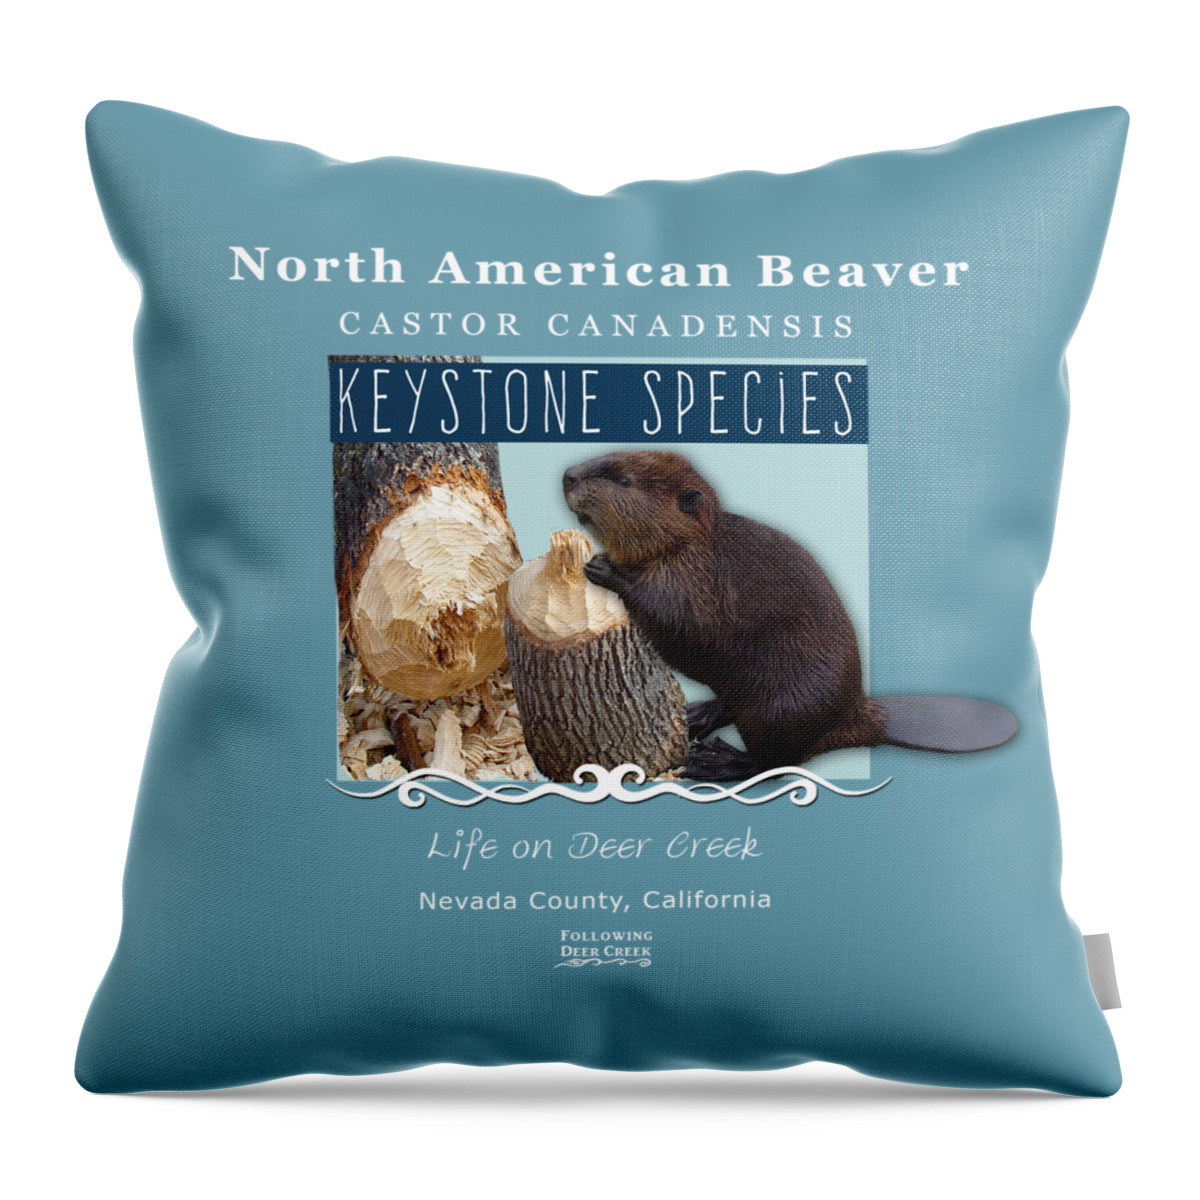 Castor Canadensis Throw Pillow featuring the digital art North American Beaver by Lisa Redfern